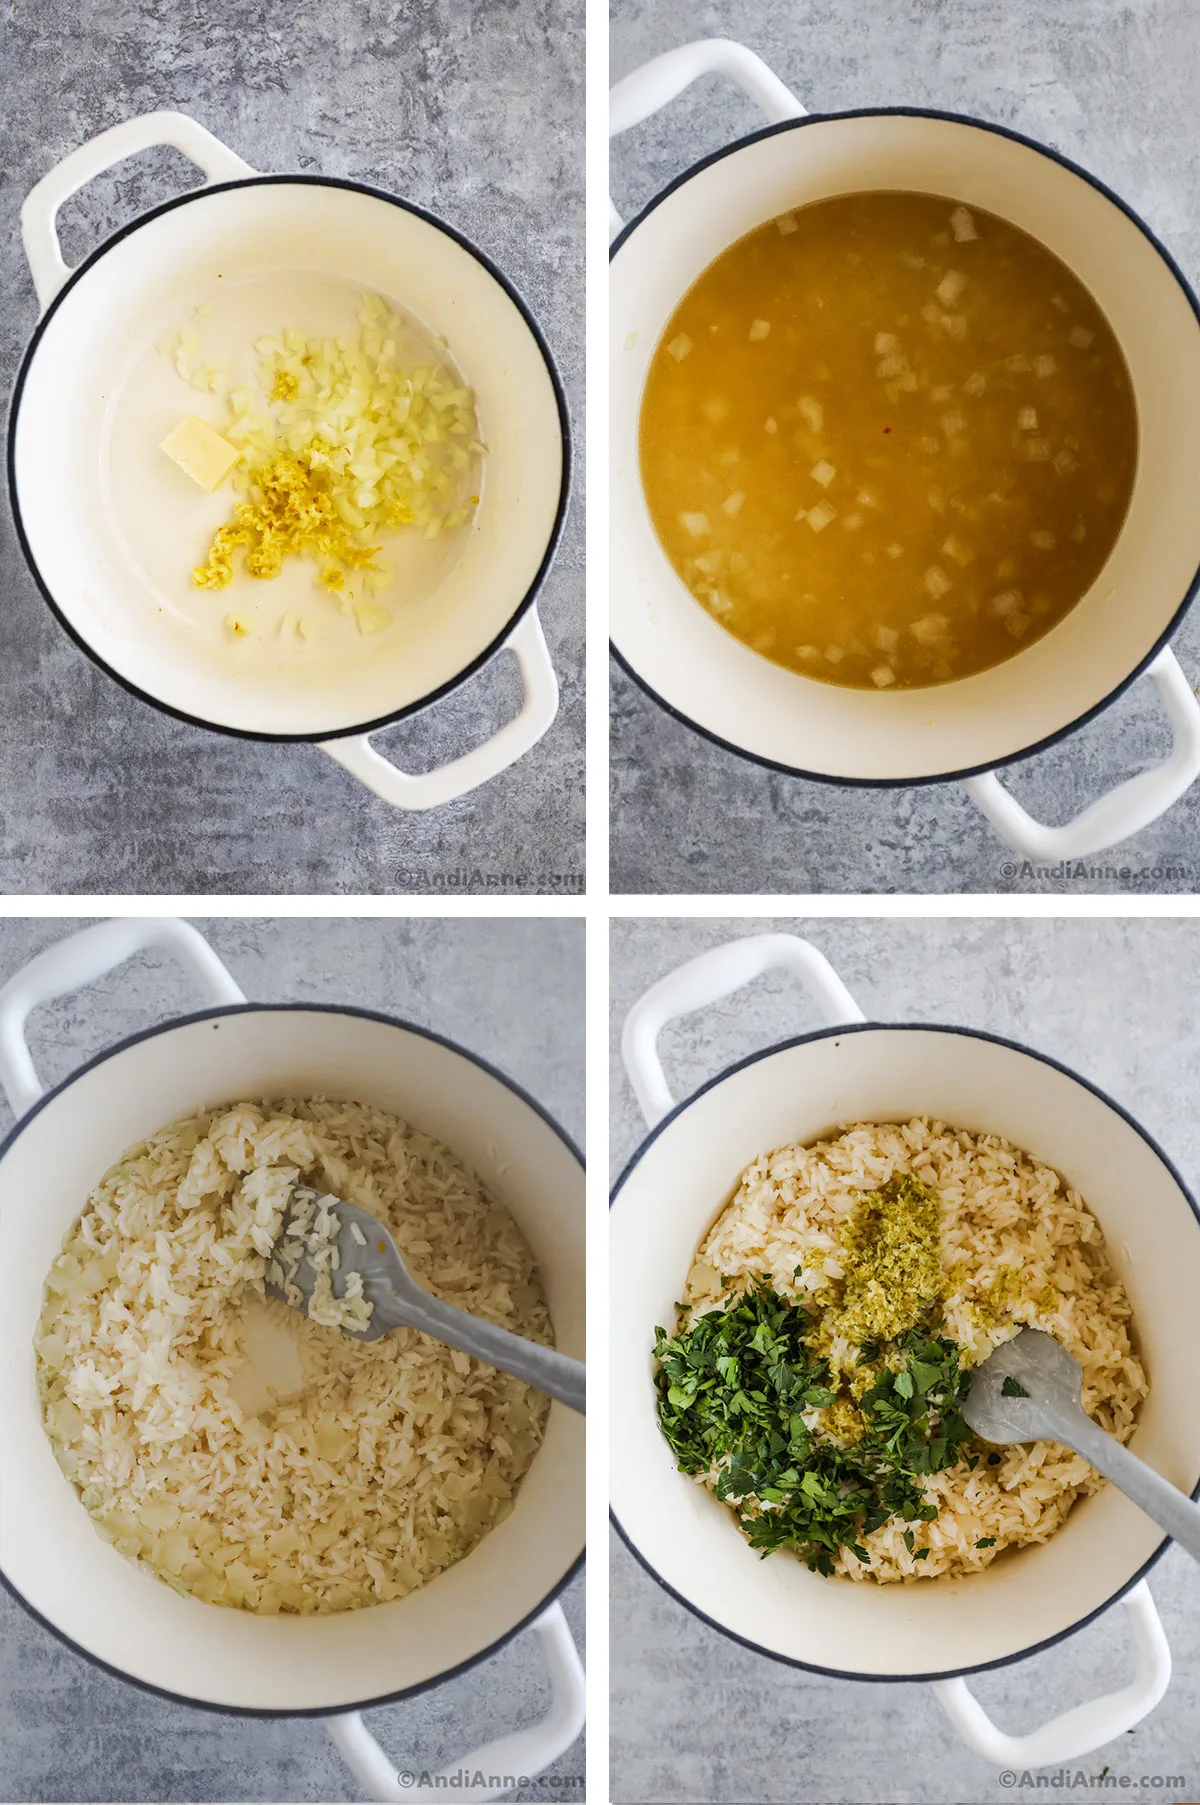 Four images showing steps to make recipe. First is garlic, onion and butter in a pot. Second is onion and broth in a pot. Third and fourth are cooked rice, one with zest and cilantro added.